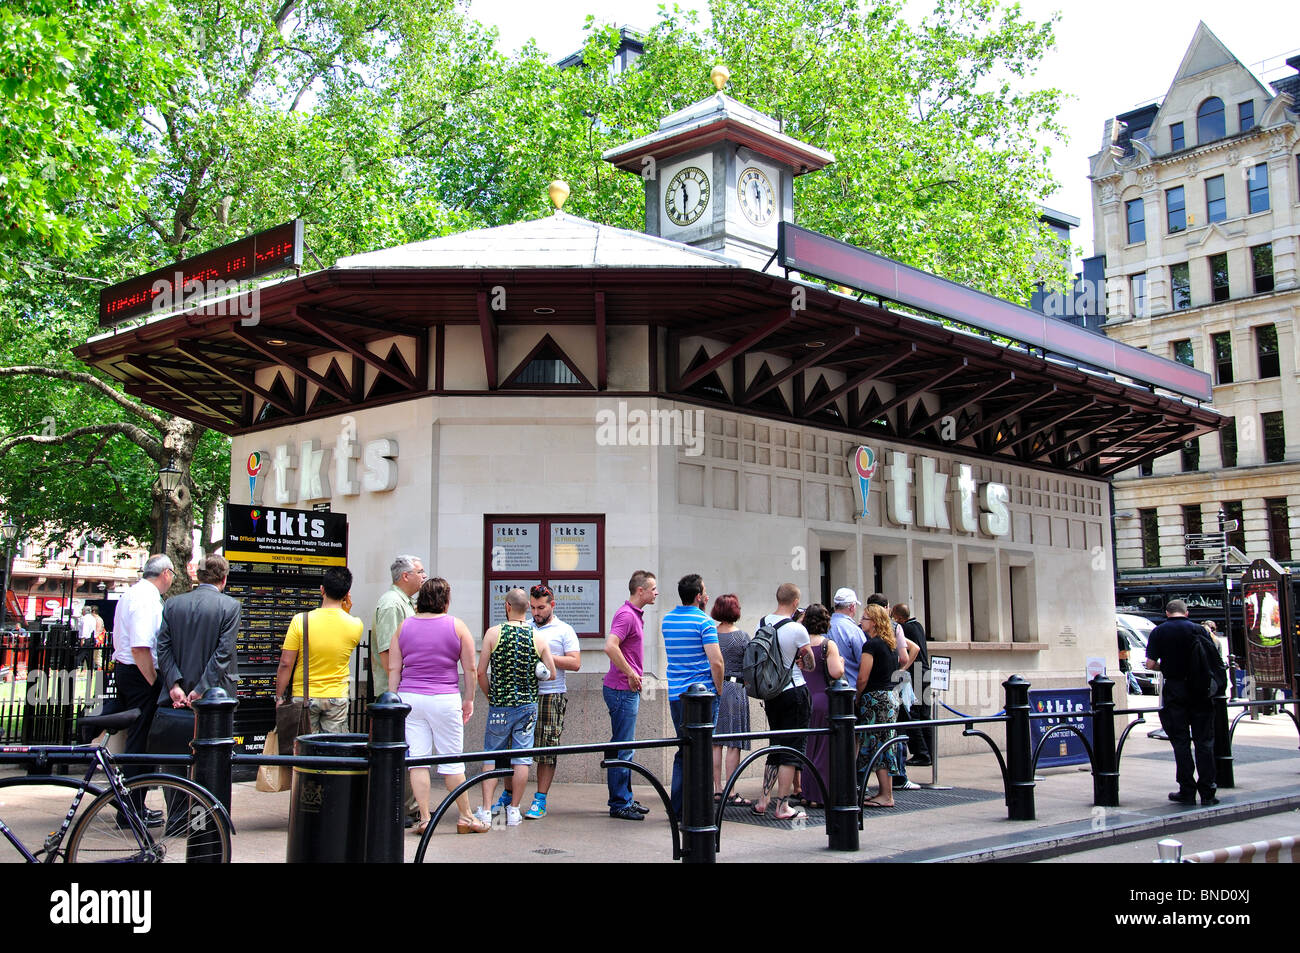 TKTS Ticket Booth, Clocktower Building, Leicester Square, West End, The City of Westminster, London, England, United Kingdom Stock Photo